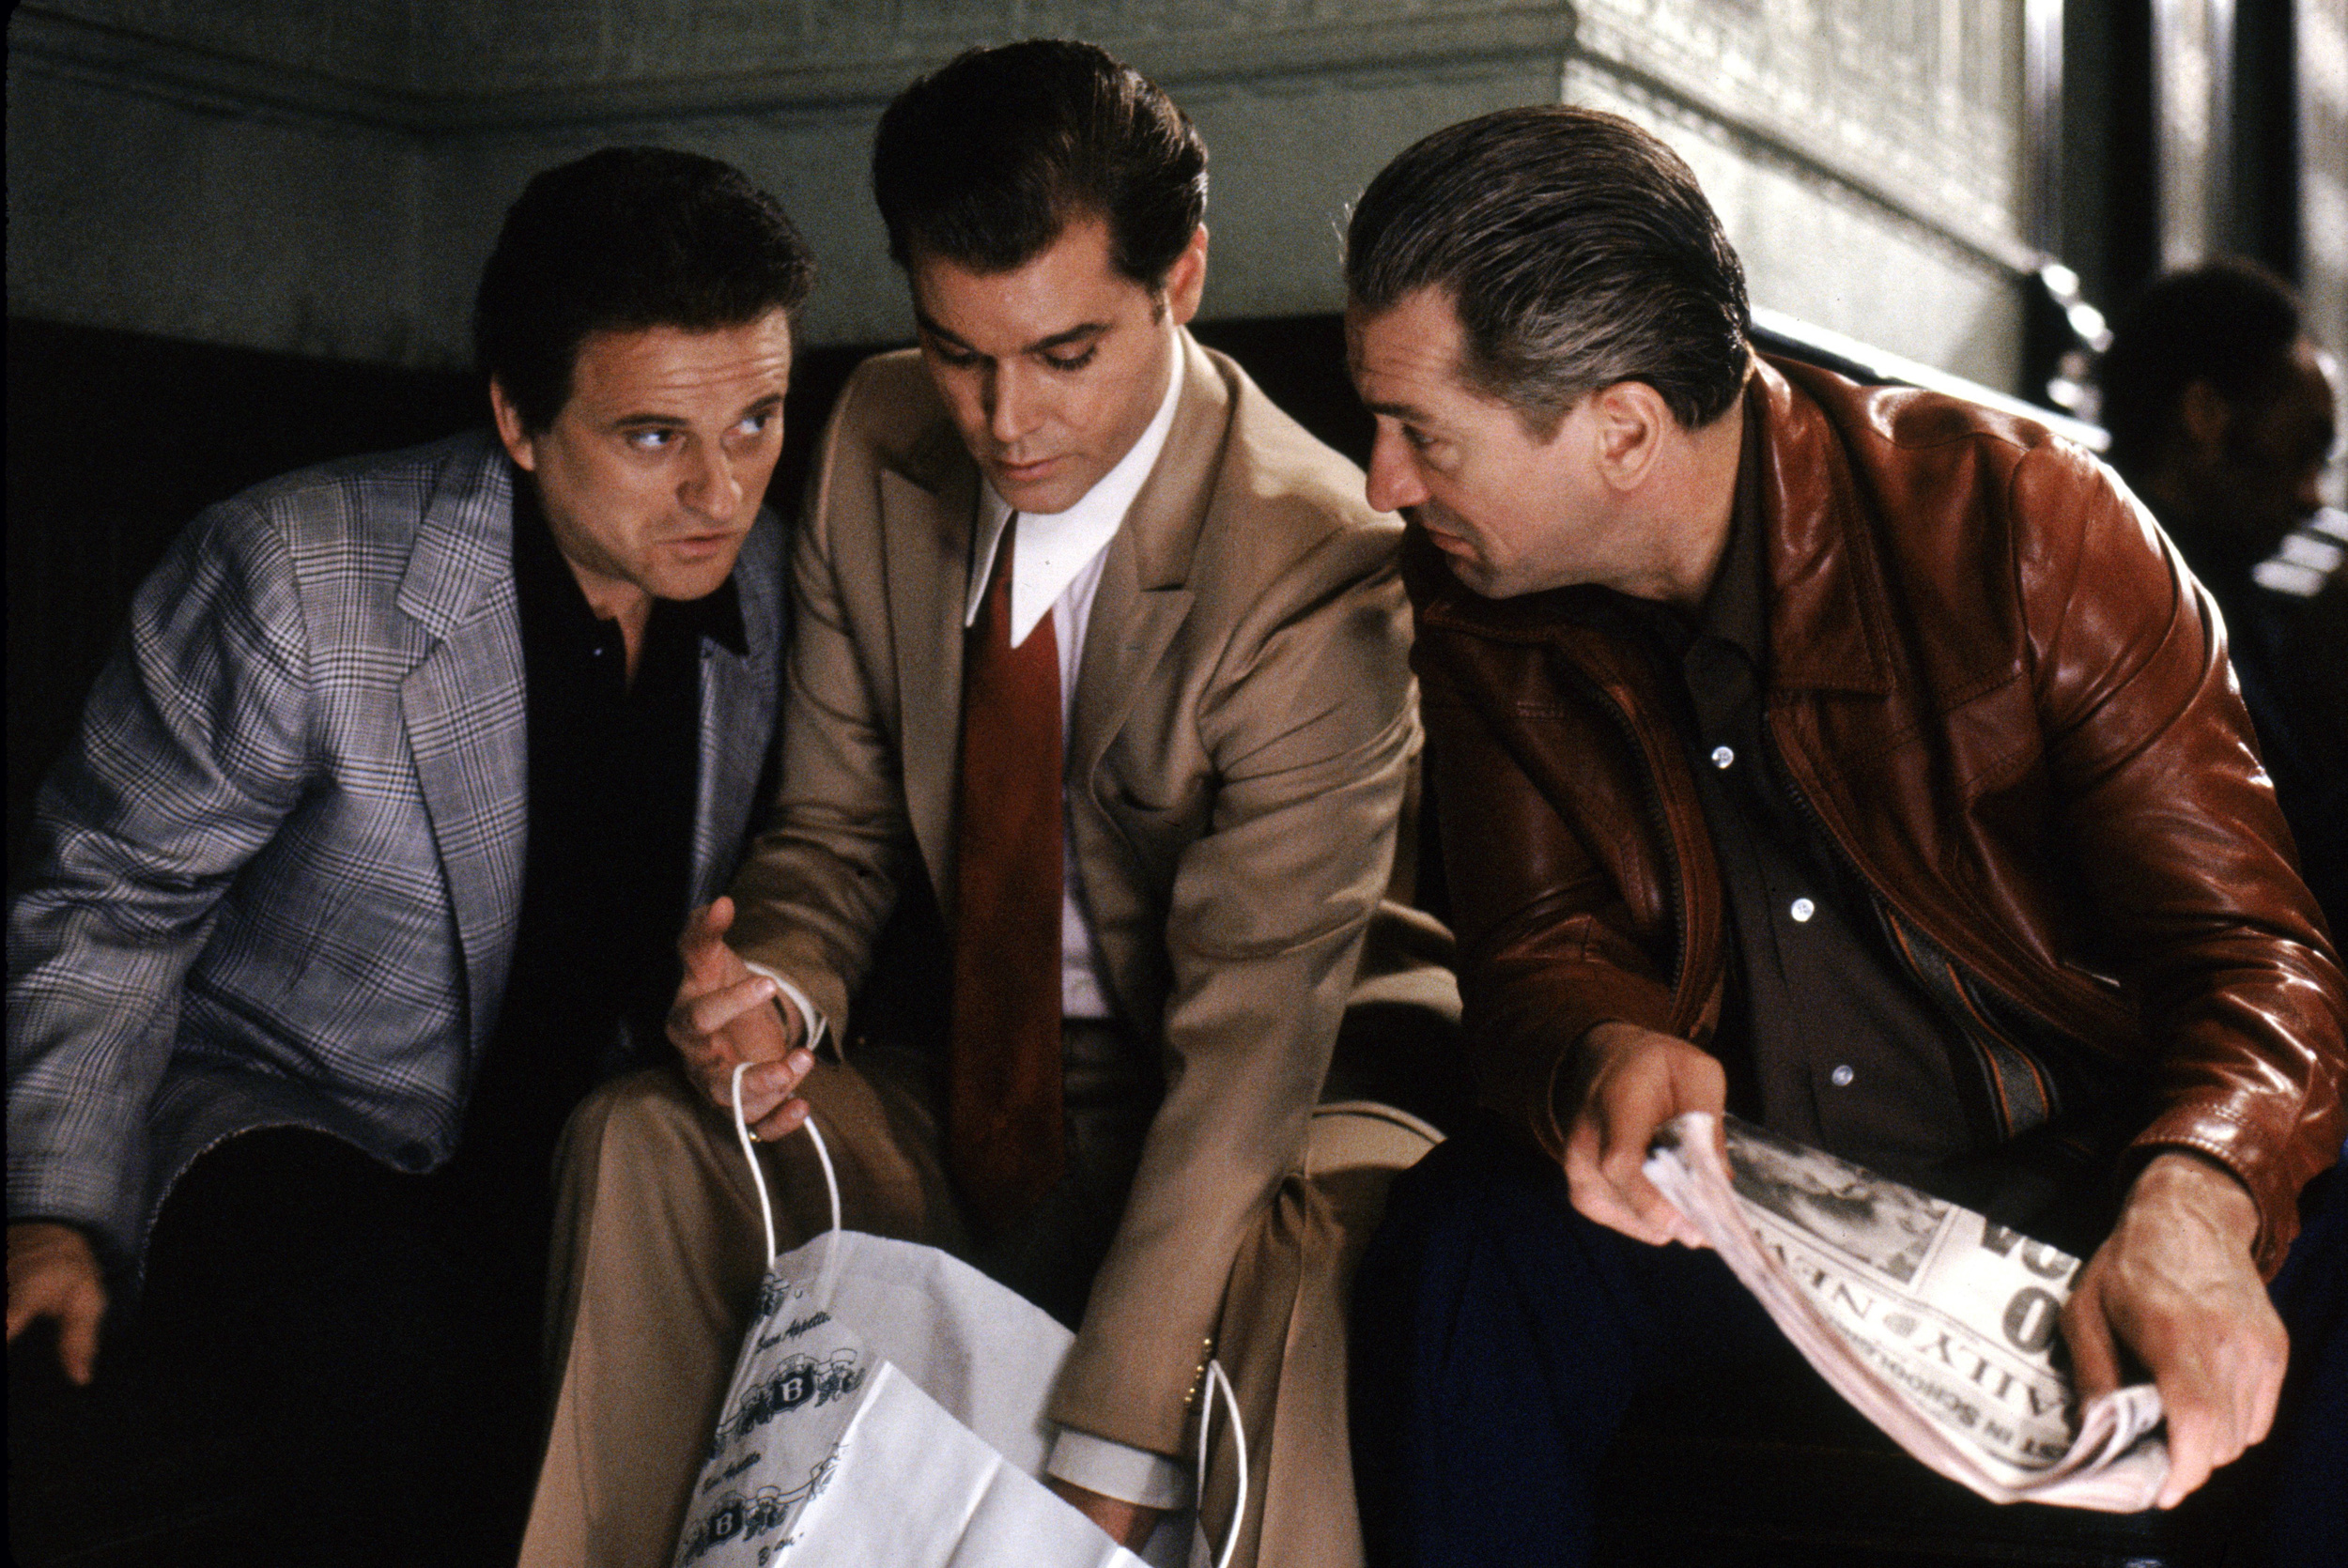 <p><em>Goodfellas</em> is similar to <em>A League of Their Own</em> in that it’s been around for so long that we think of it solely as an iconic movie and not a film based on real events. More than anything, it should prove that Al Pacino and Joe Pesci are at their best when telling stories about organized crimes. </p><p><a href='https://www.msn.com/en-us/community/channel/vid-cj9pqbr0vn9in2b6ddcd8sfgpfq6x6utp44fssrv6mc2gtybw0us'>Did you enjoy this slideshow? Follow us on MSN to see more of our exclusive entertainment content.</a></p>